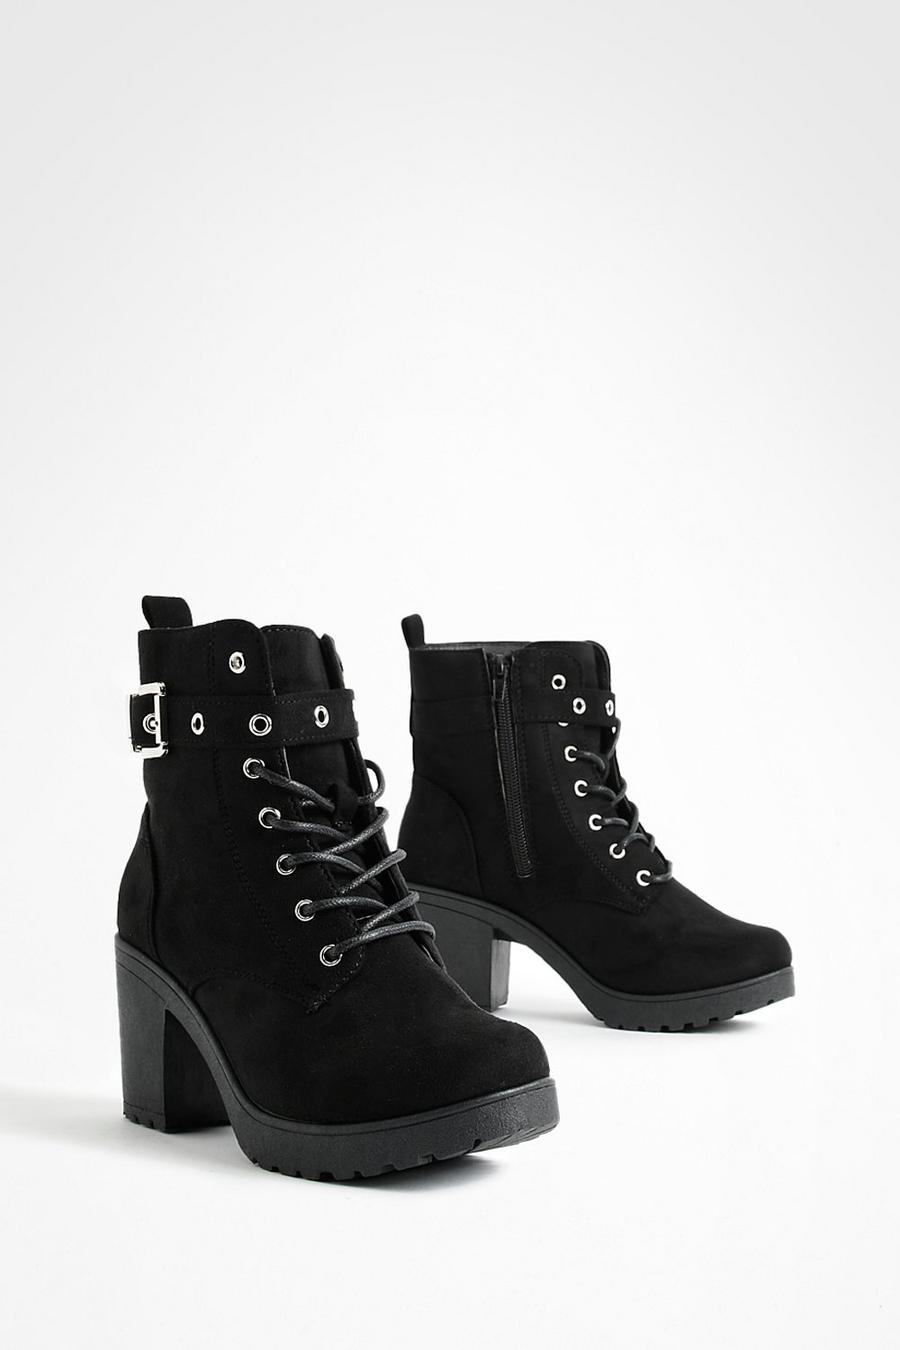 Black Wide Width Buckle Lace Up Chunky Combat Boots